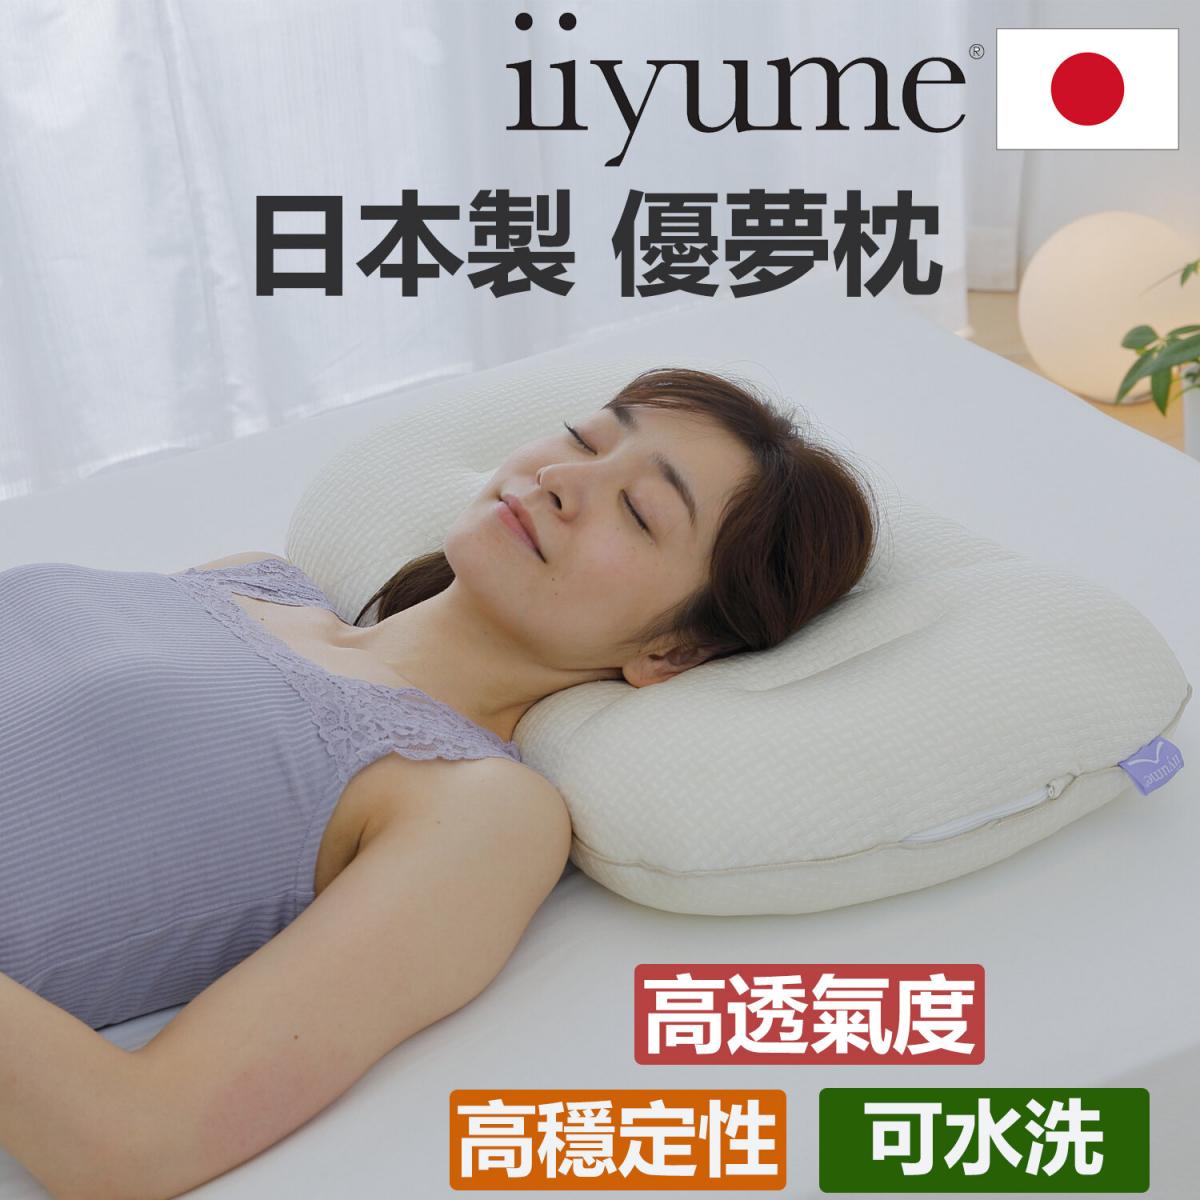 iiyume iiyume pillow (Made In Japan) ○Comfortable Touching ○High air permeability ○Washable Pillow Color Beige米色 HKTVmall The Largest HK Shopping Platform pic